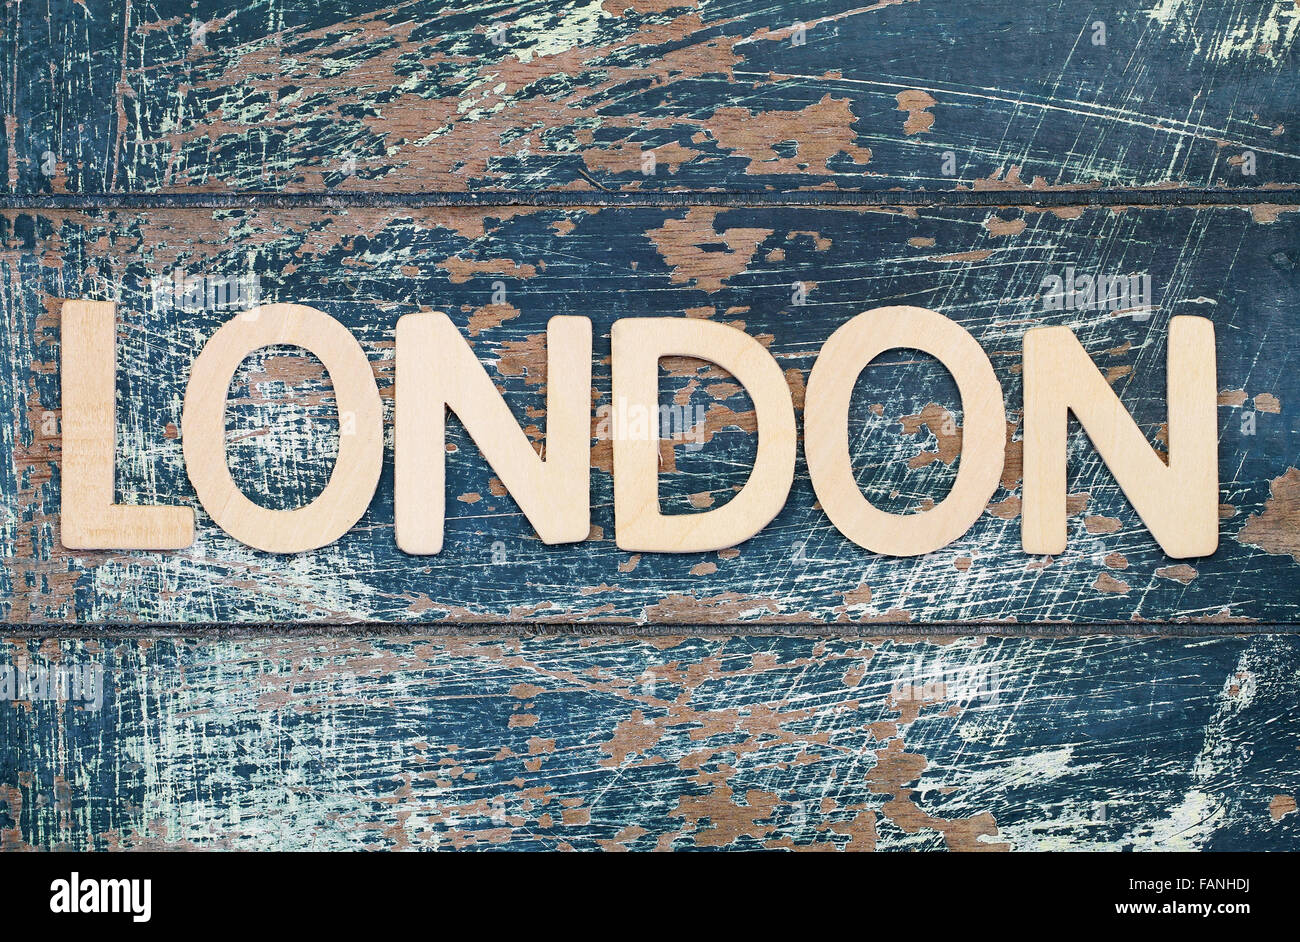 London written with wooden letters on rustic surface Stock Photo